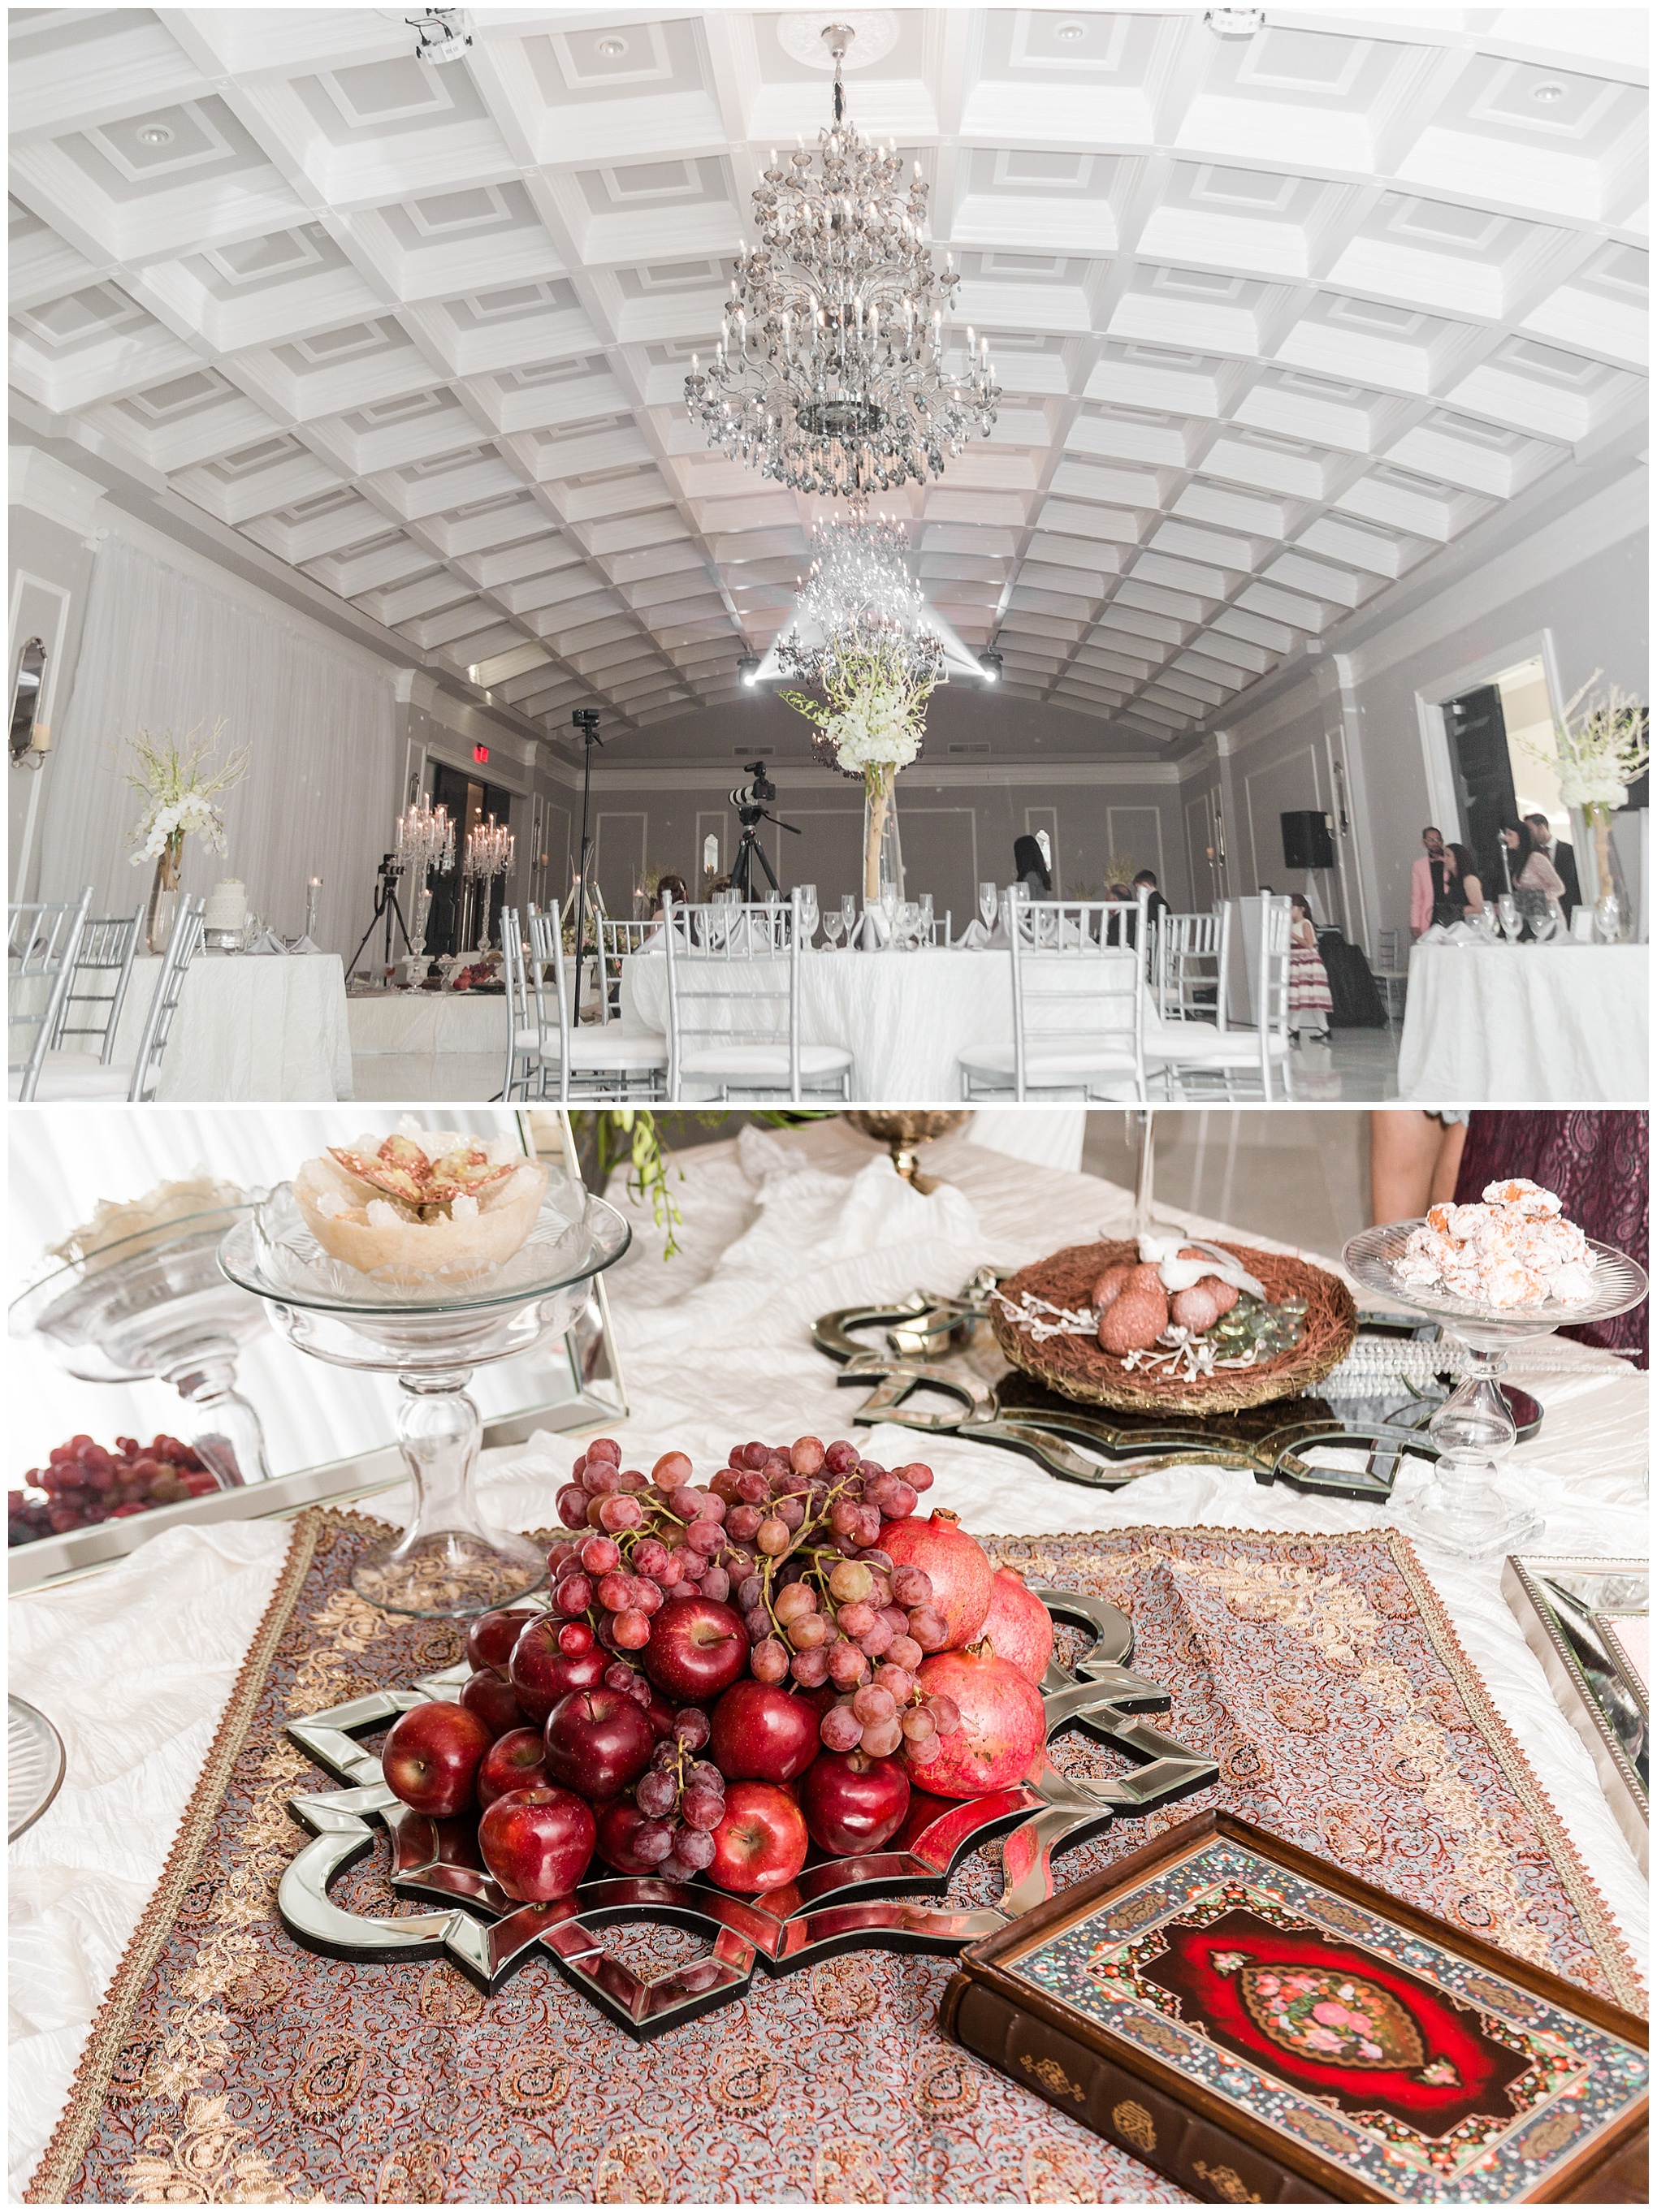 photography ready wedding venues, Bellevue Conference Center, Chantilly, white walls, white ceilings, wedding venue, northern VA, sofreh aghd, Persian wedding 